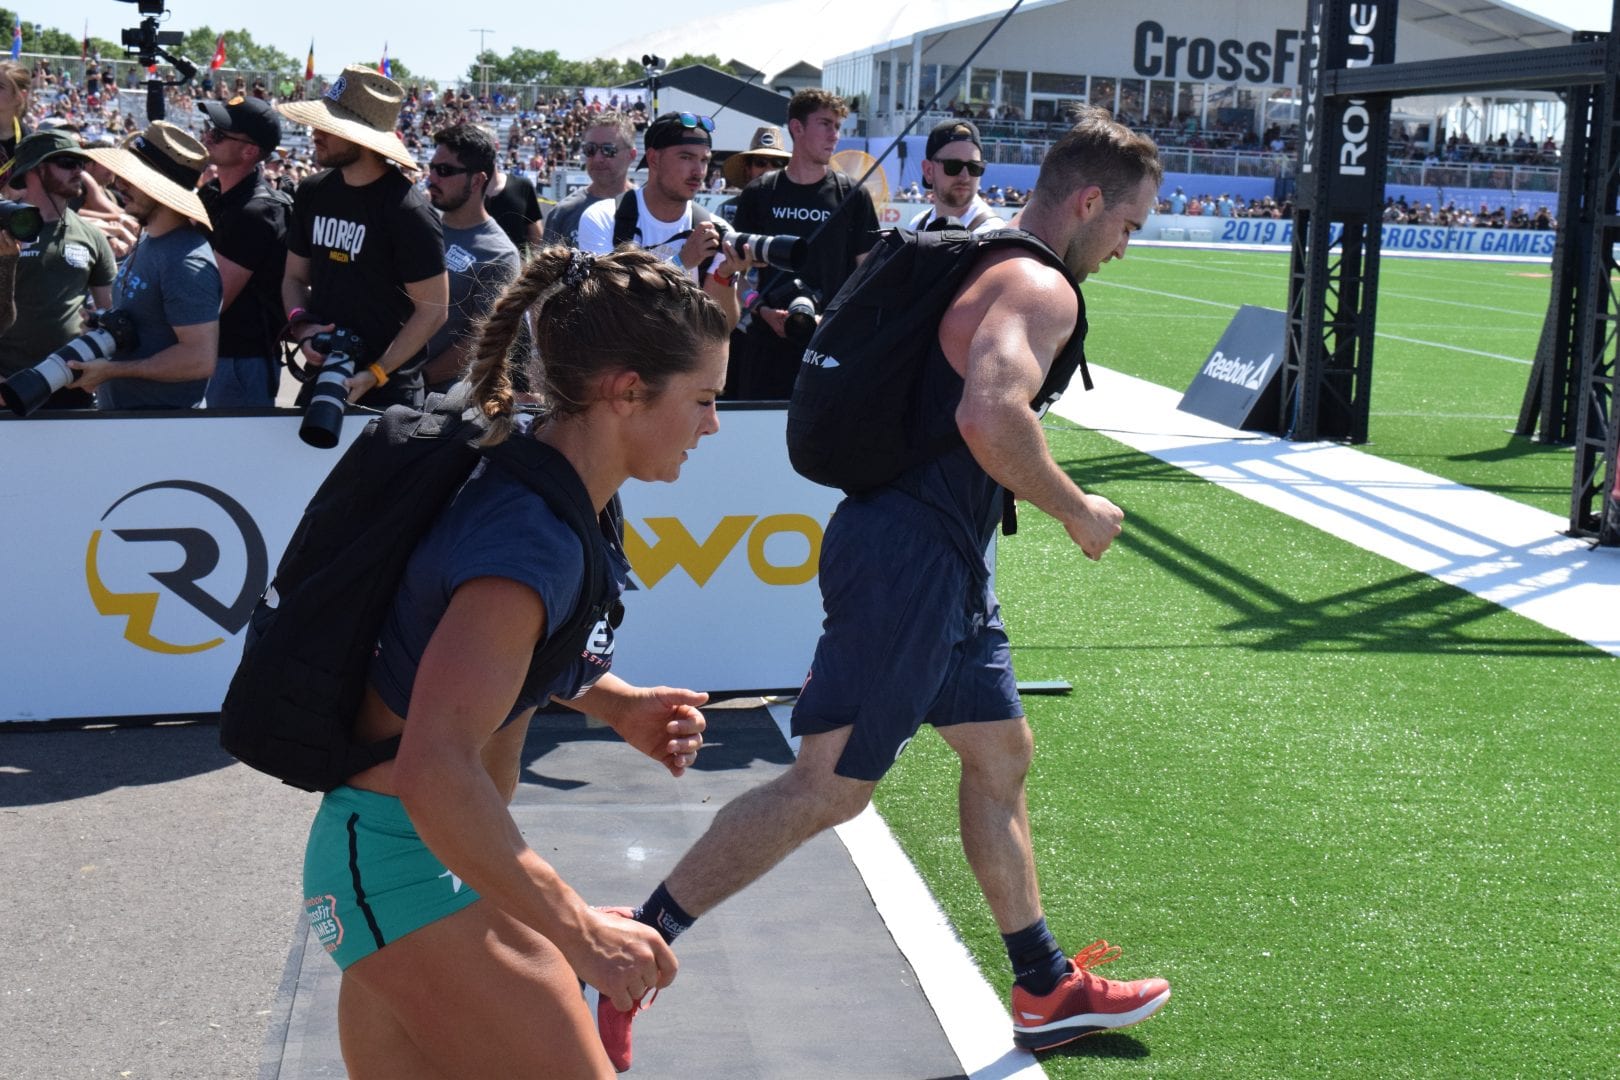 Carrie Beamer completes the Ruck Run event at the 2019 CrossFit Games.